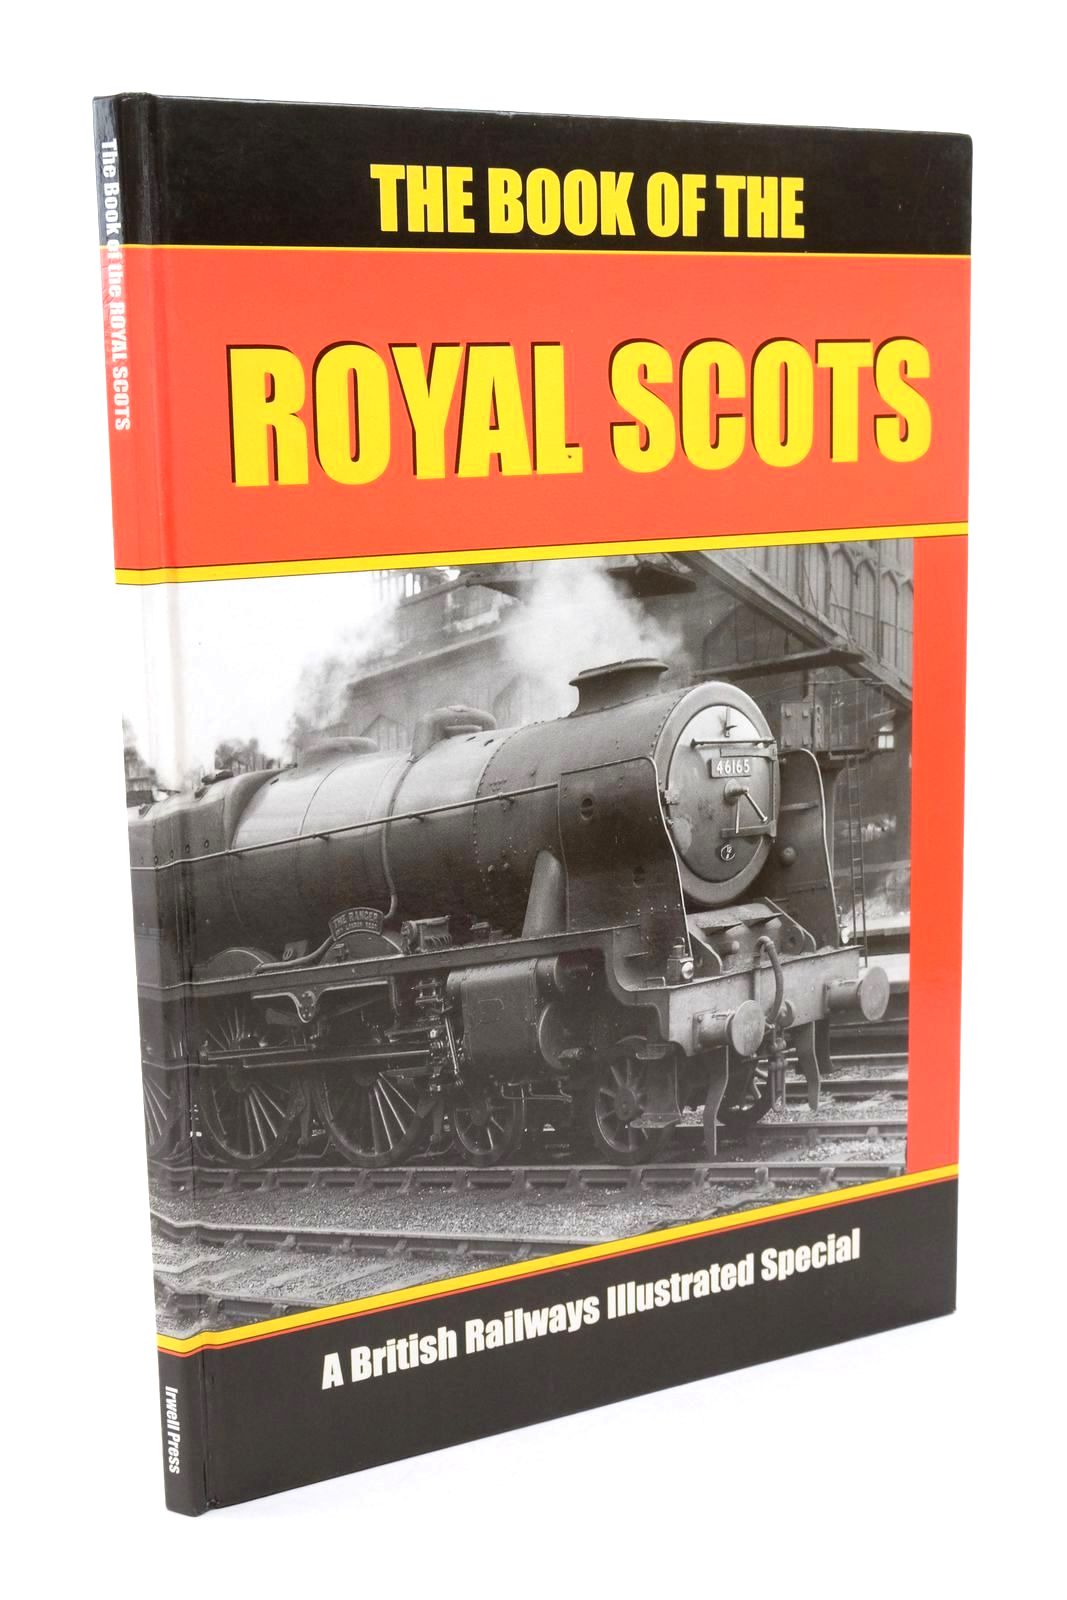 Photo of THE BOOK OF THE ROYAL SCOTS published by Irwell Press (STOCK CODE: 1322457)  for sale by Stella & Rose's Books